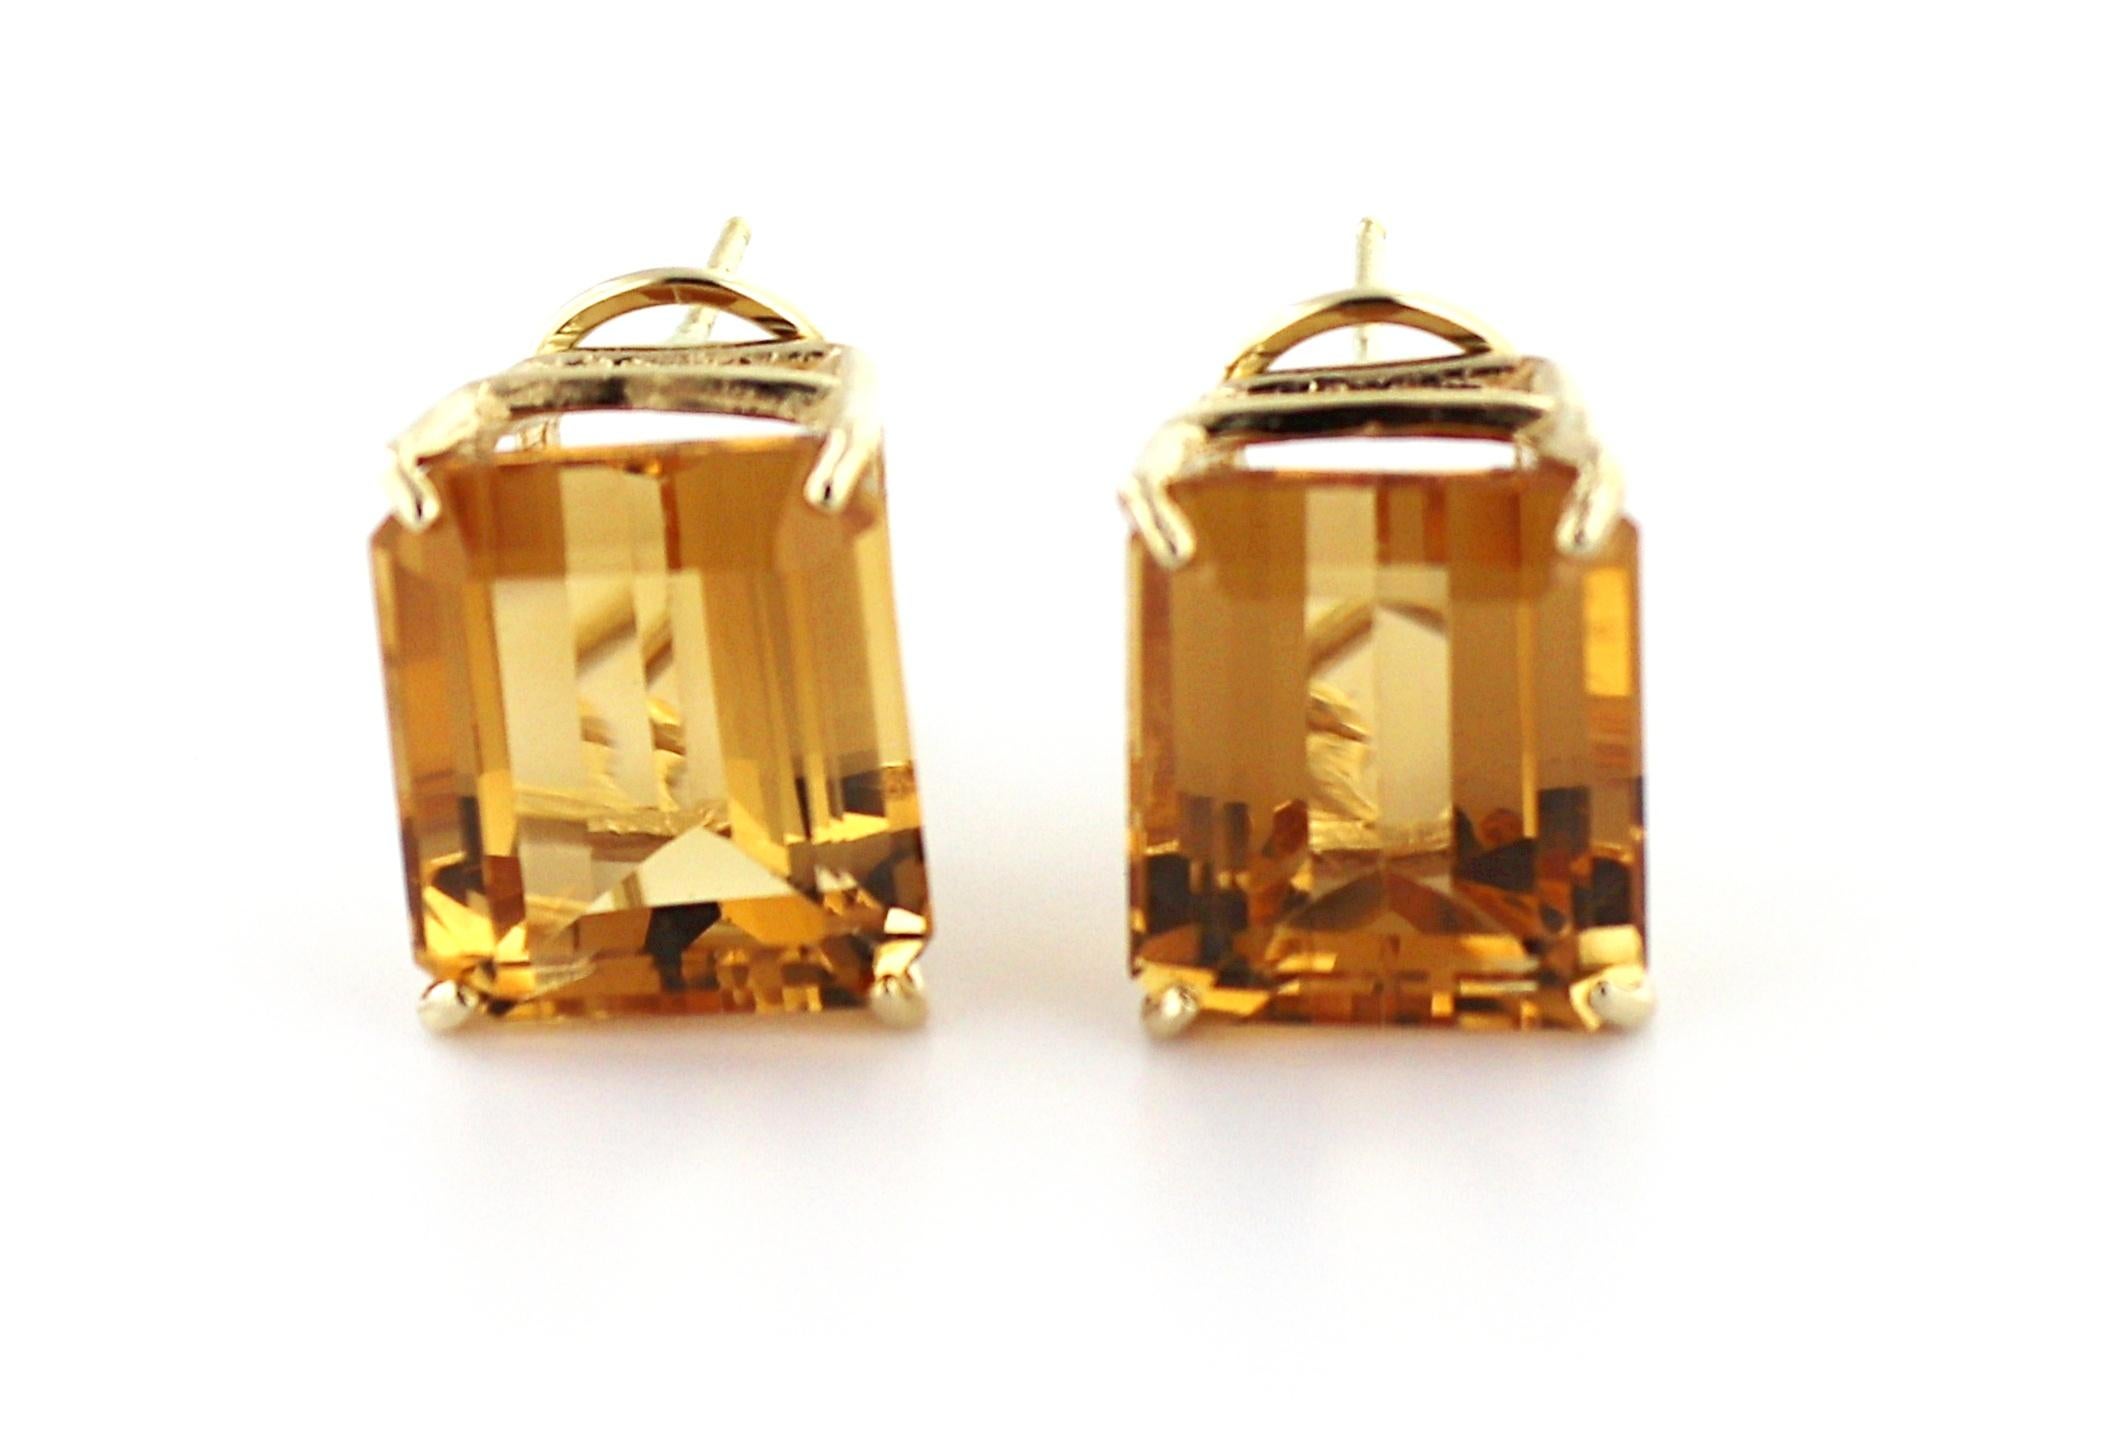 Featuring (2) emerald-cut citrines, 16.70 cts., set in 14k yellow gold, hinged omega back mountings, 14.5
X 12.1 X 18.1 mm, Gross weight 8.72 grams.